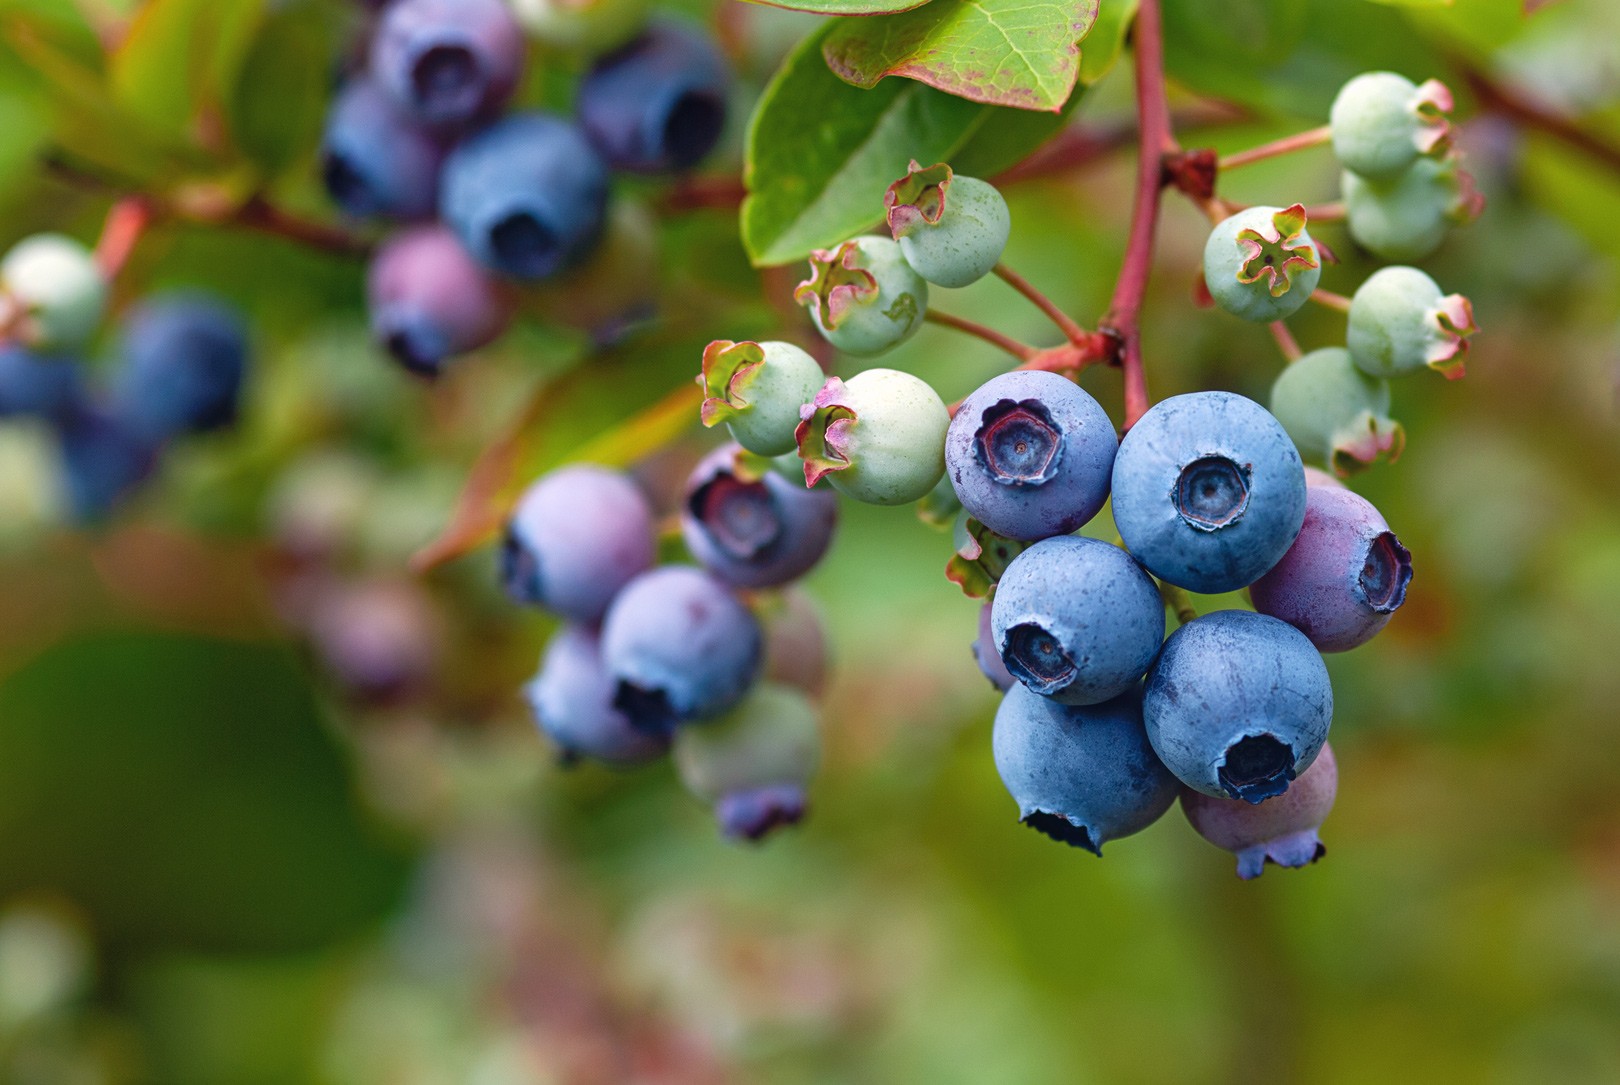 What Is a Huckleberry and What Does It Taste Like?